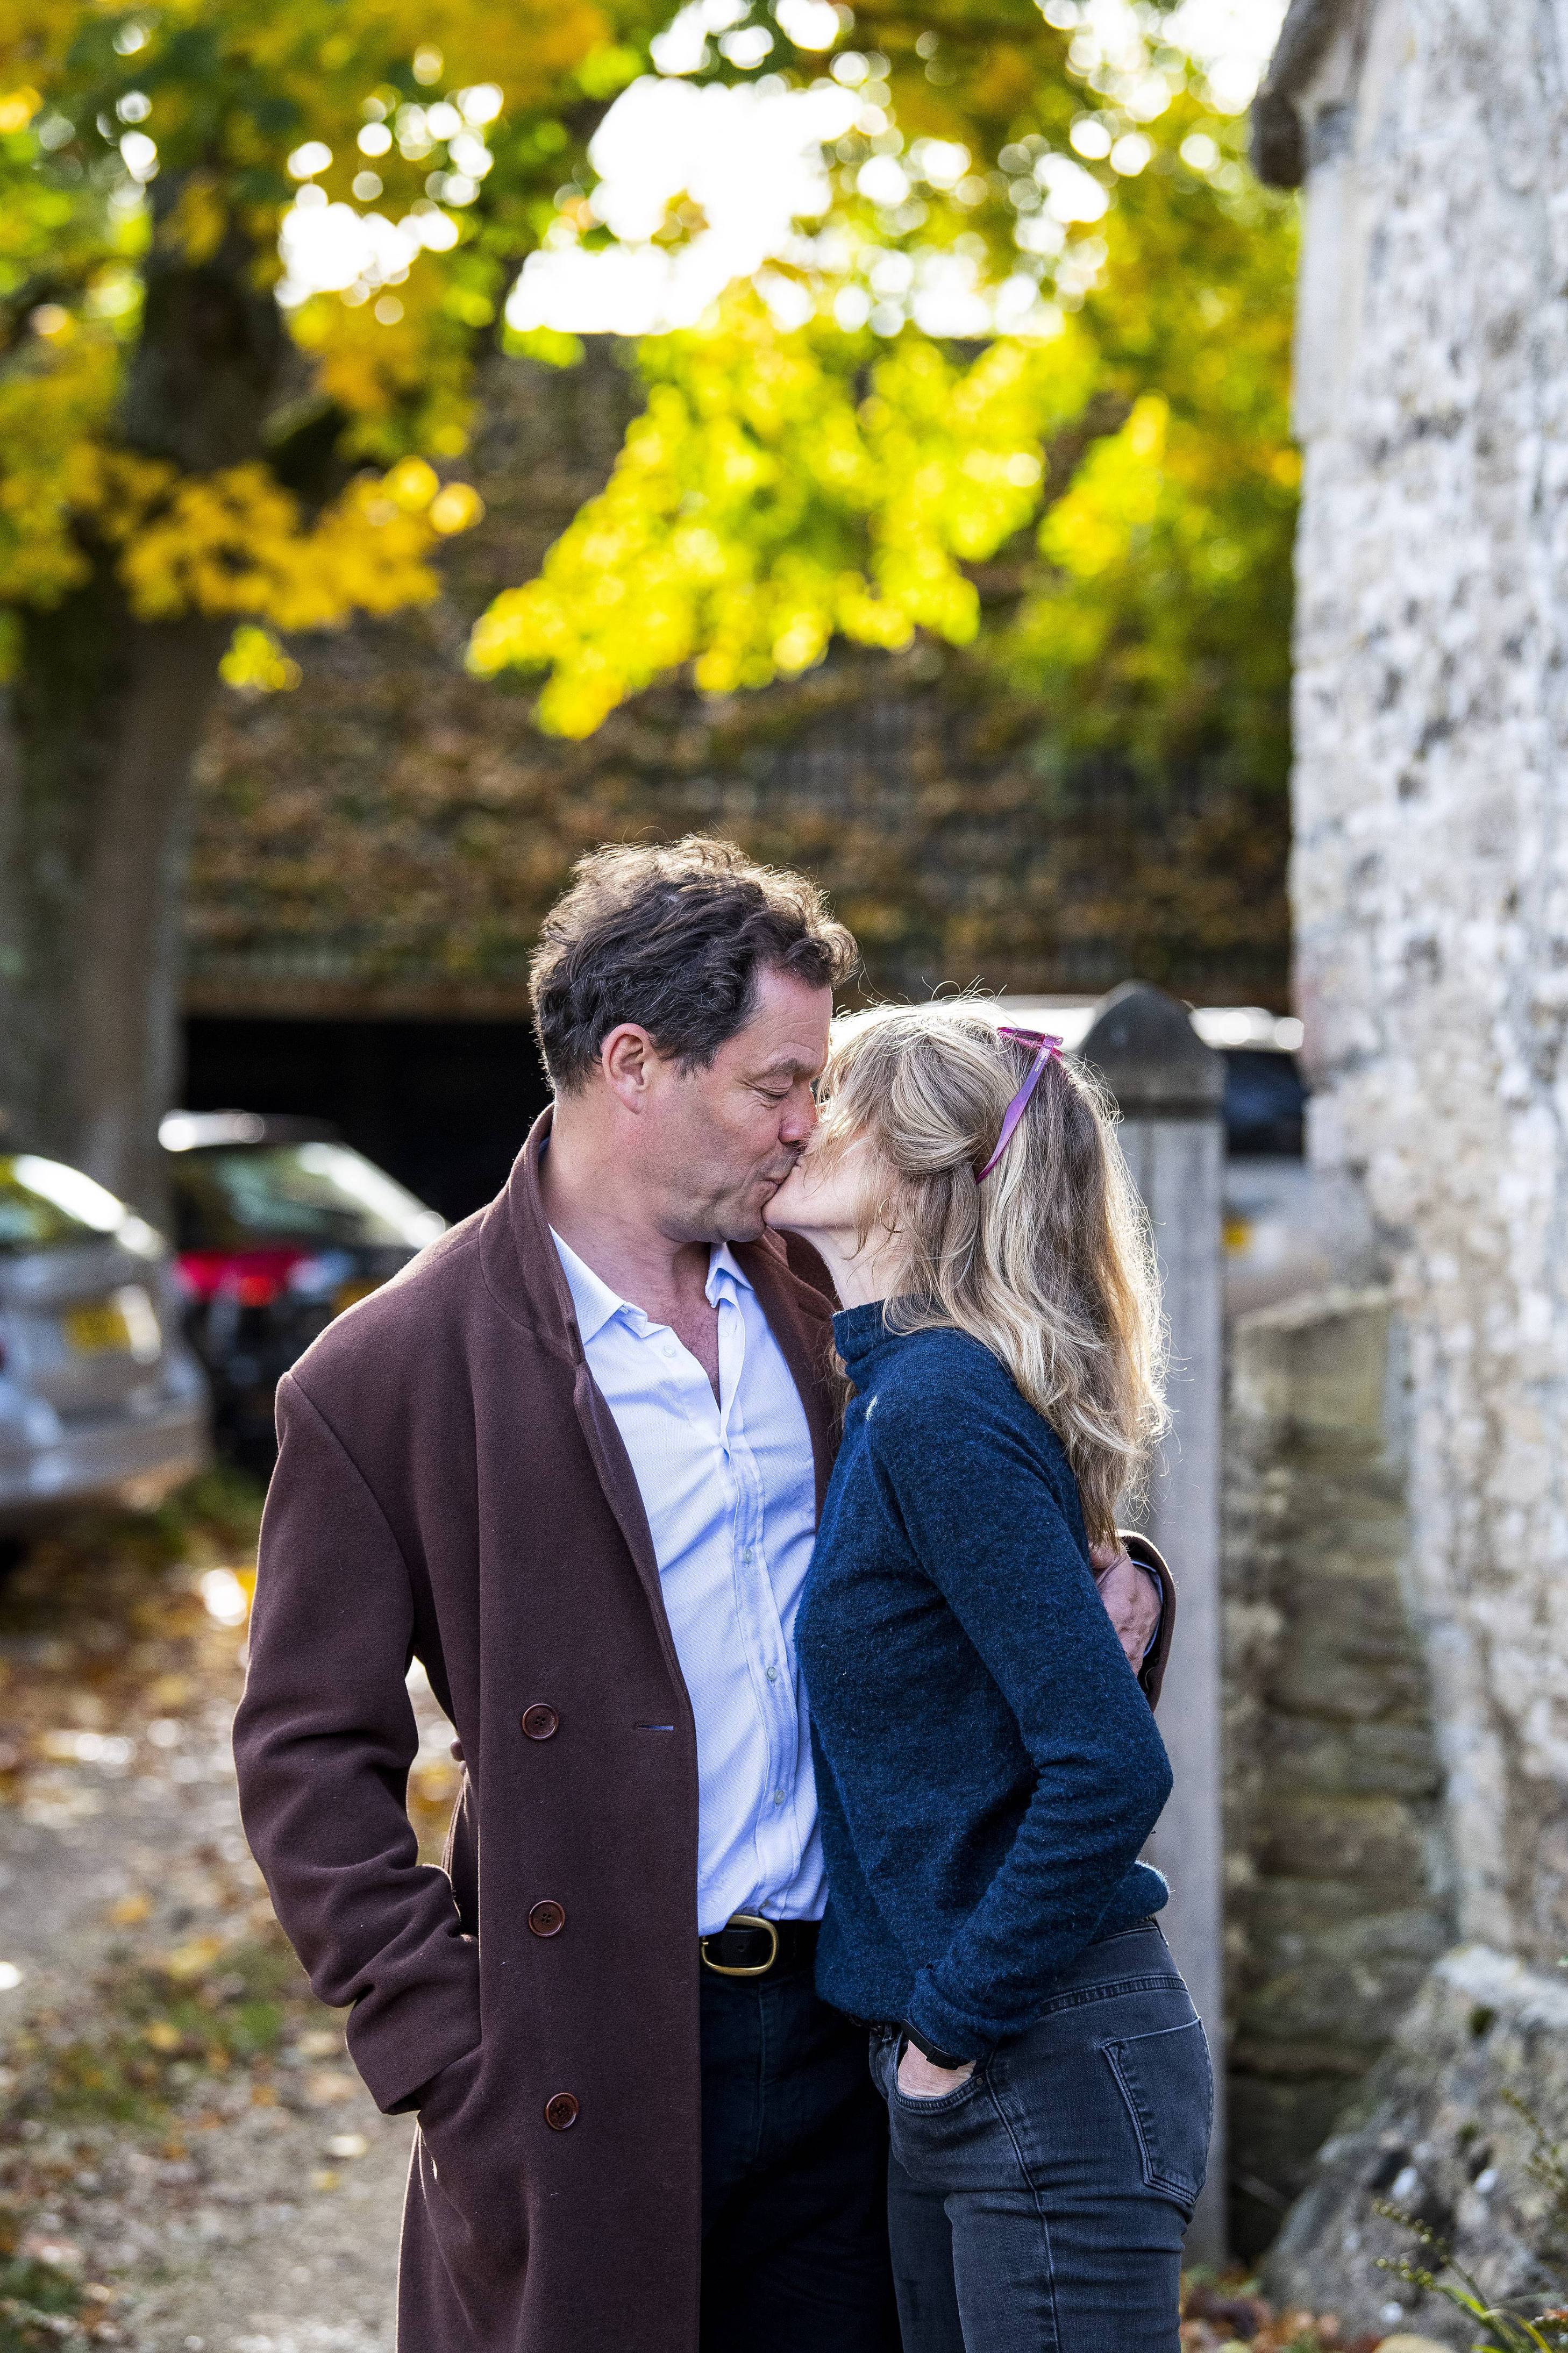 A photo of Catherine FitzGerald and Dominic West, engaged in a passionate kiss for the camera and they look adorable.